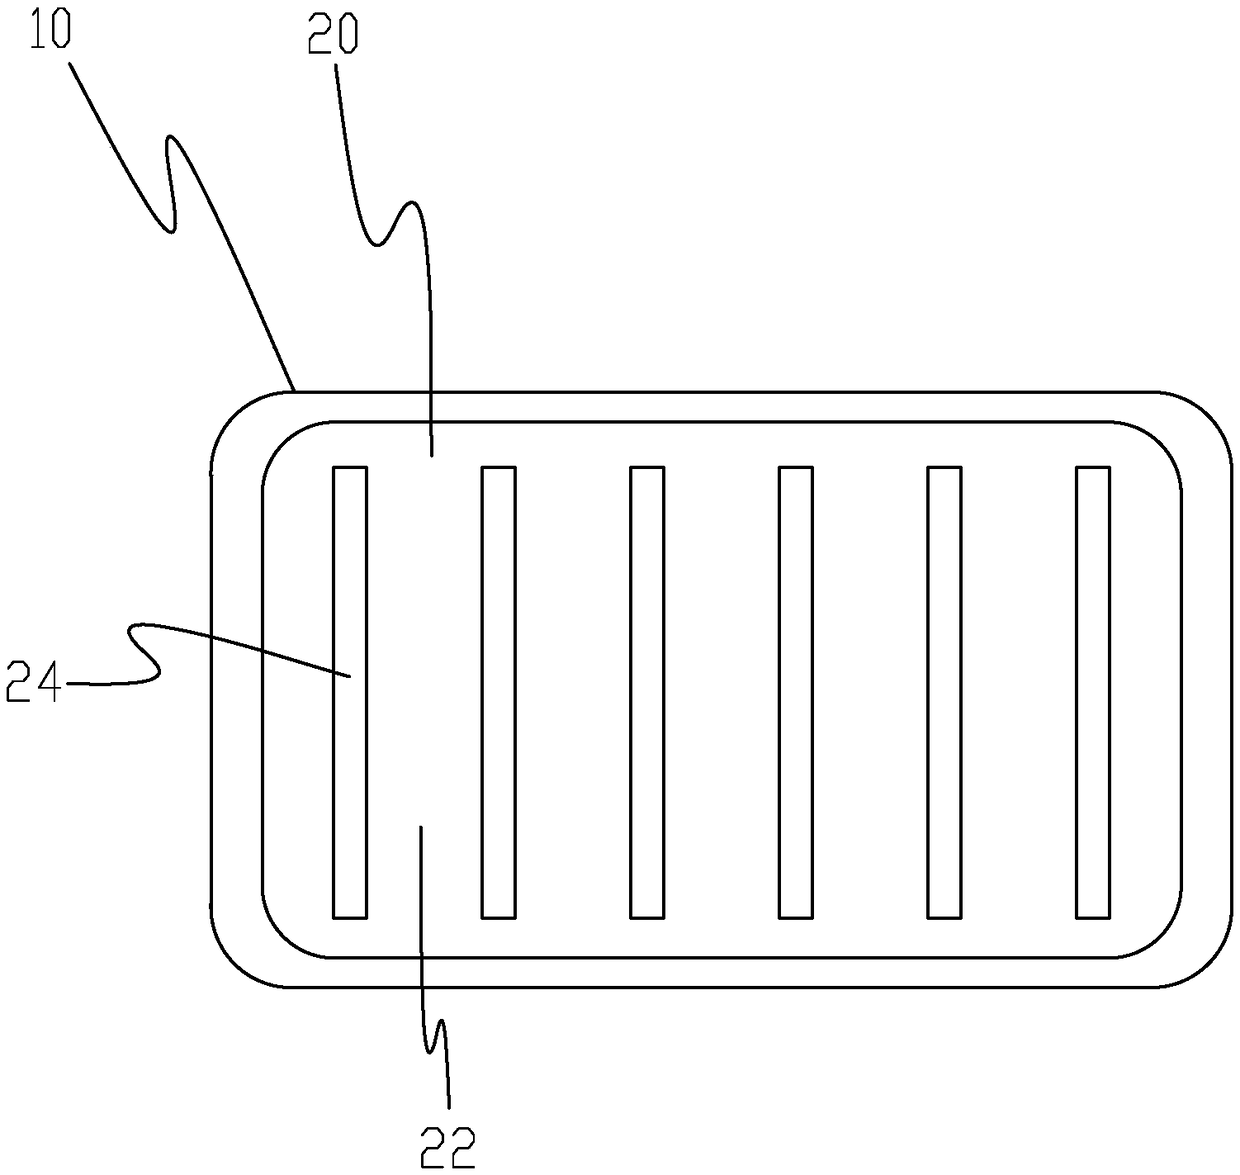 Packaging structure capable of being used repeatedly